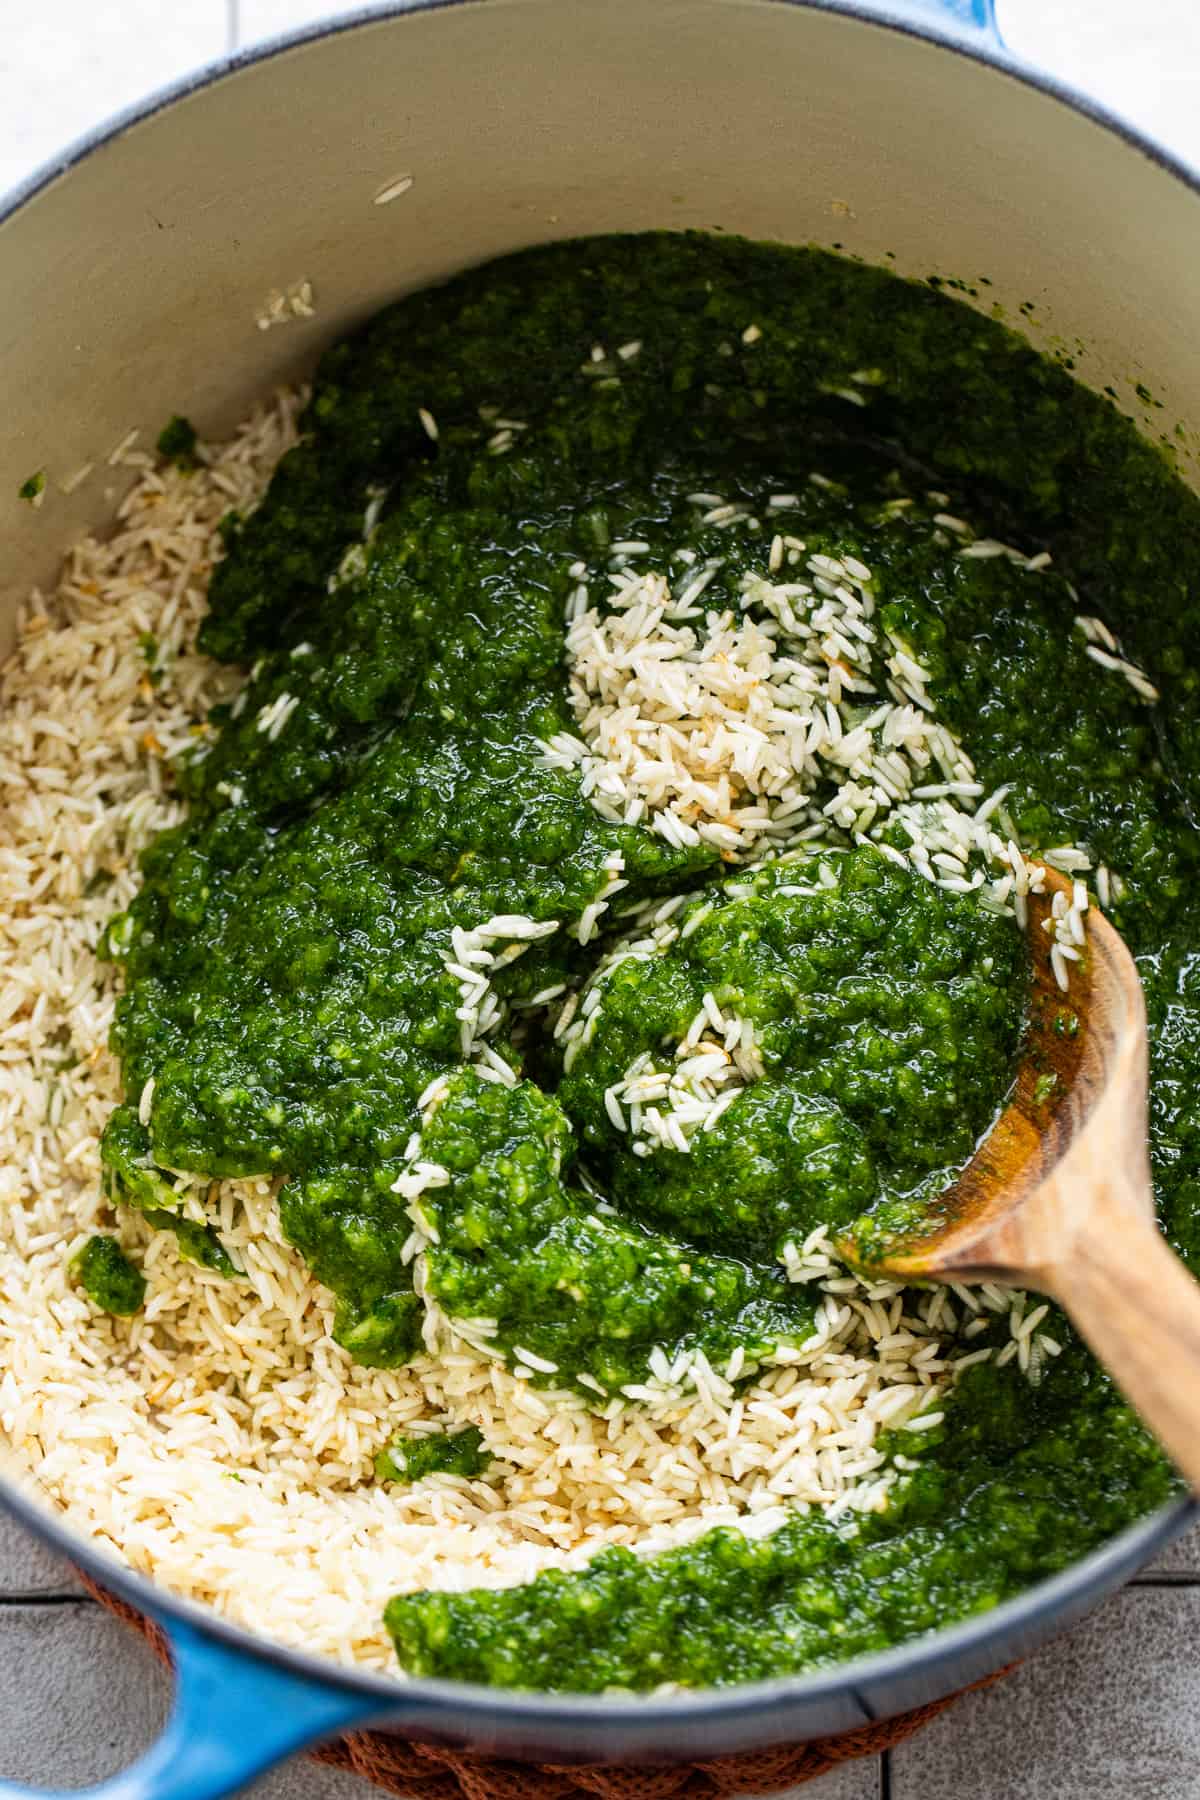 A verde mixture made of blended herbs, peppers, and onions being stirring into a pot of toasted rice.